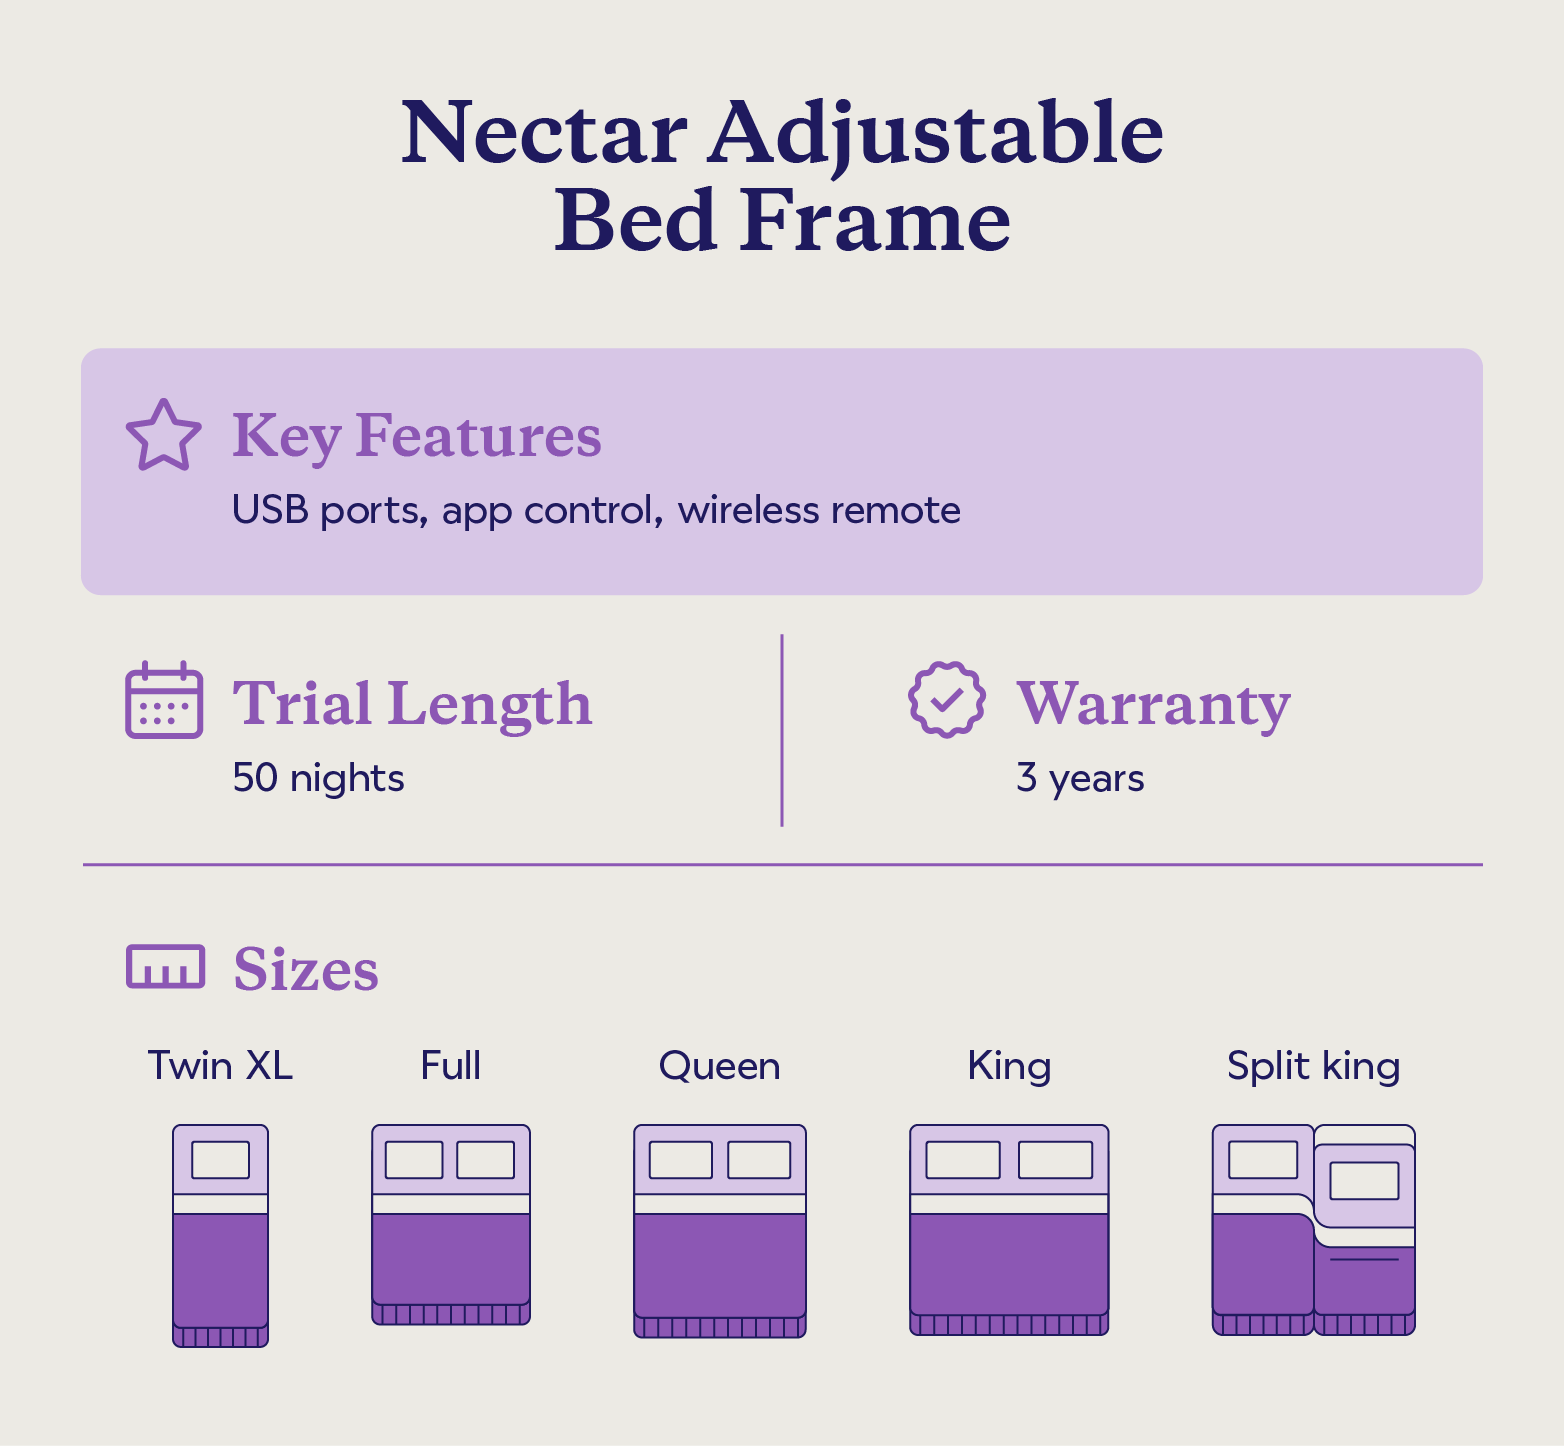 Key features and sizes of the Nectar Adjustable Bed Frame.